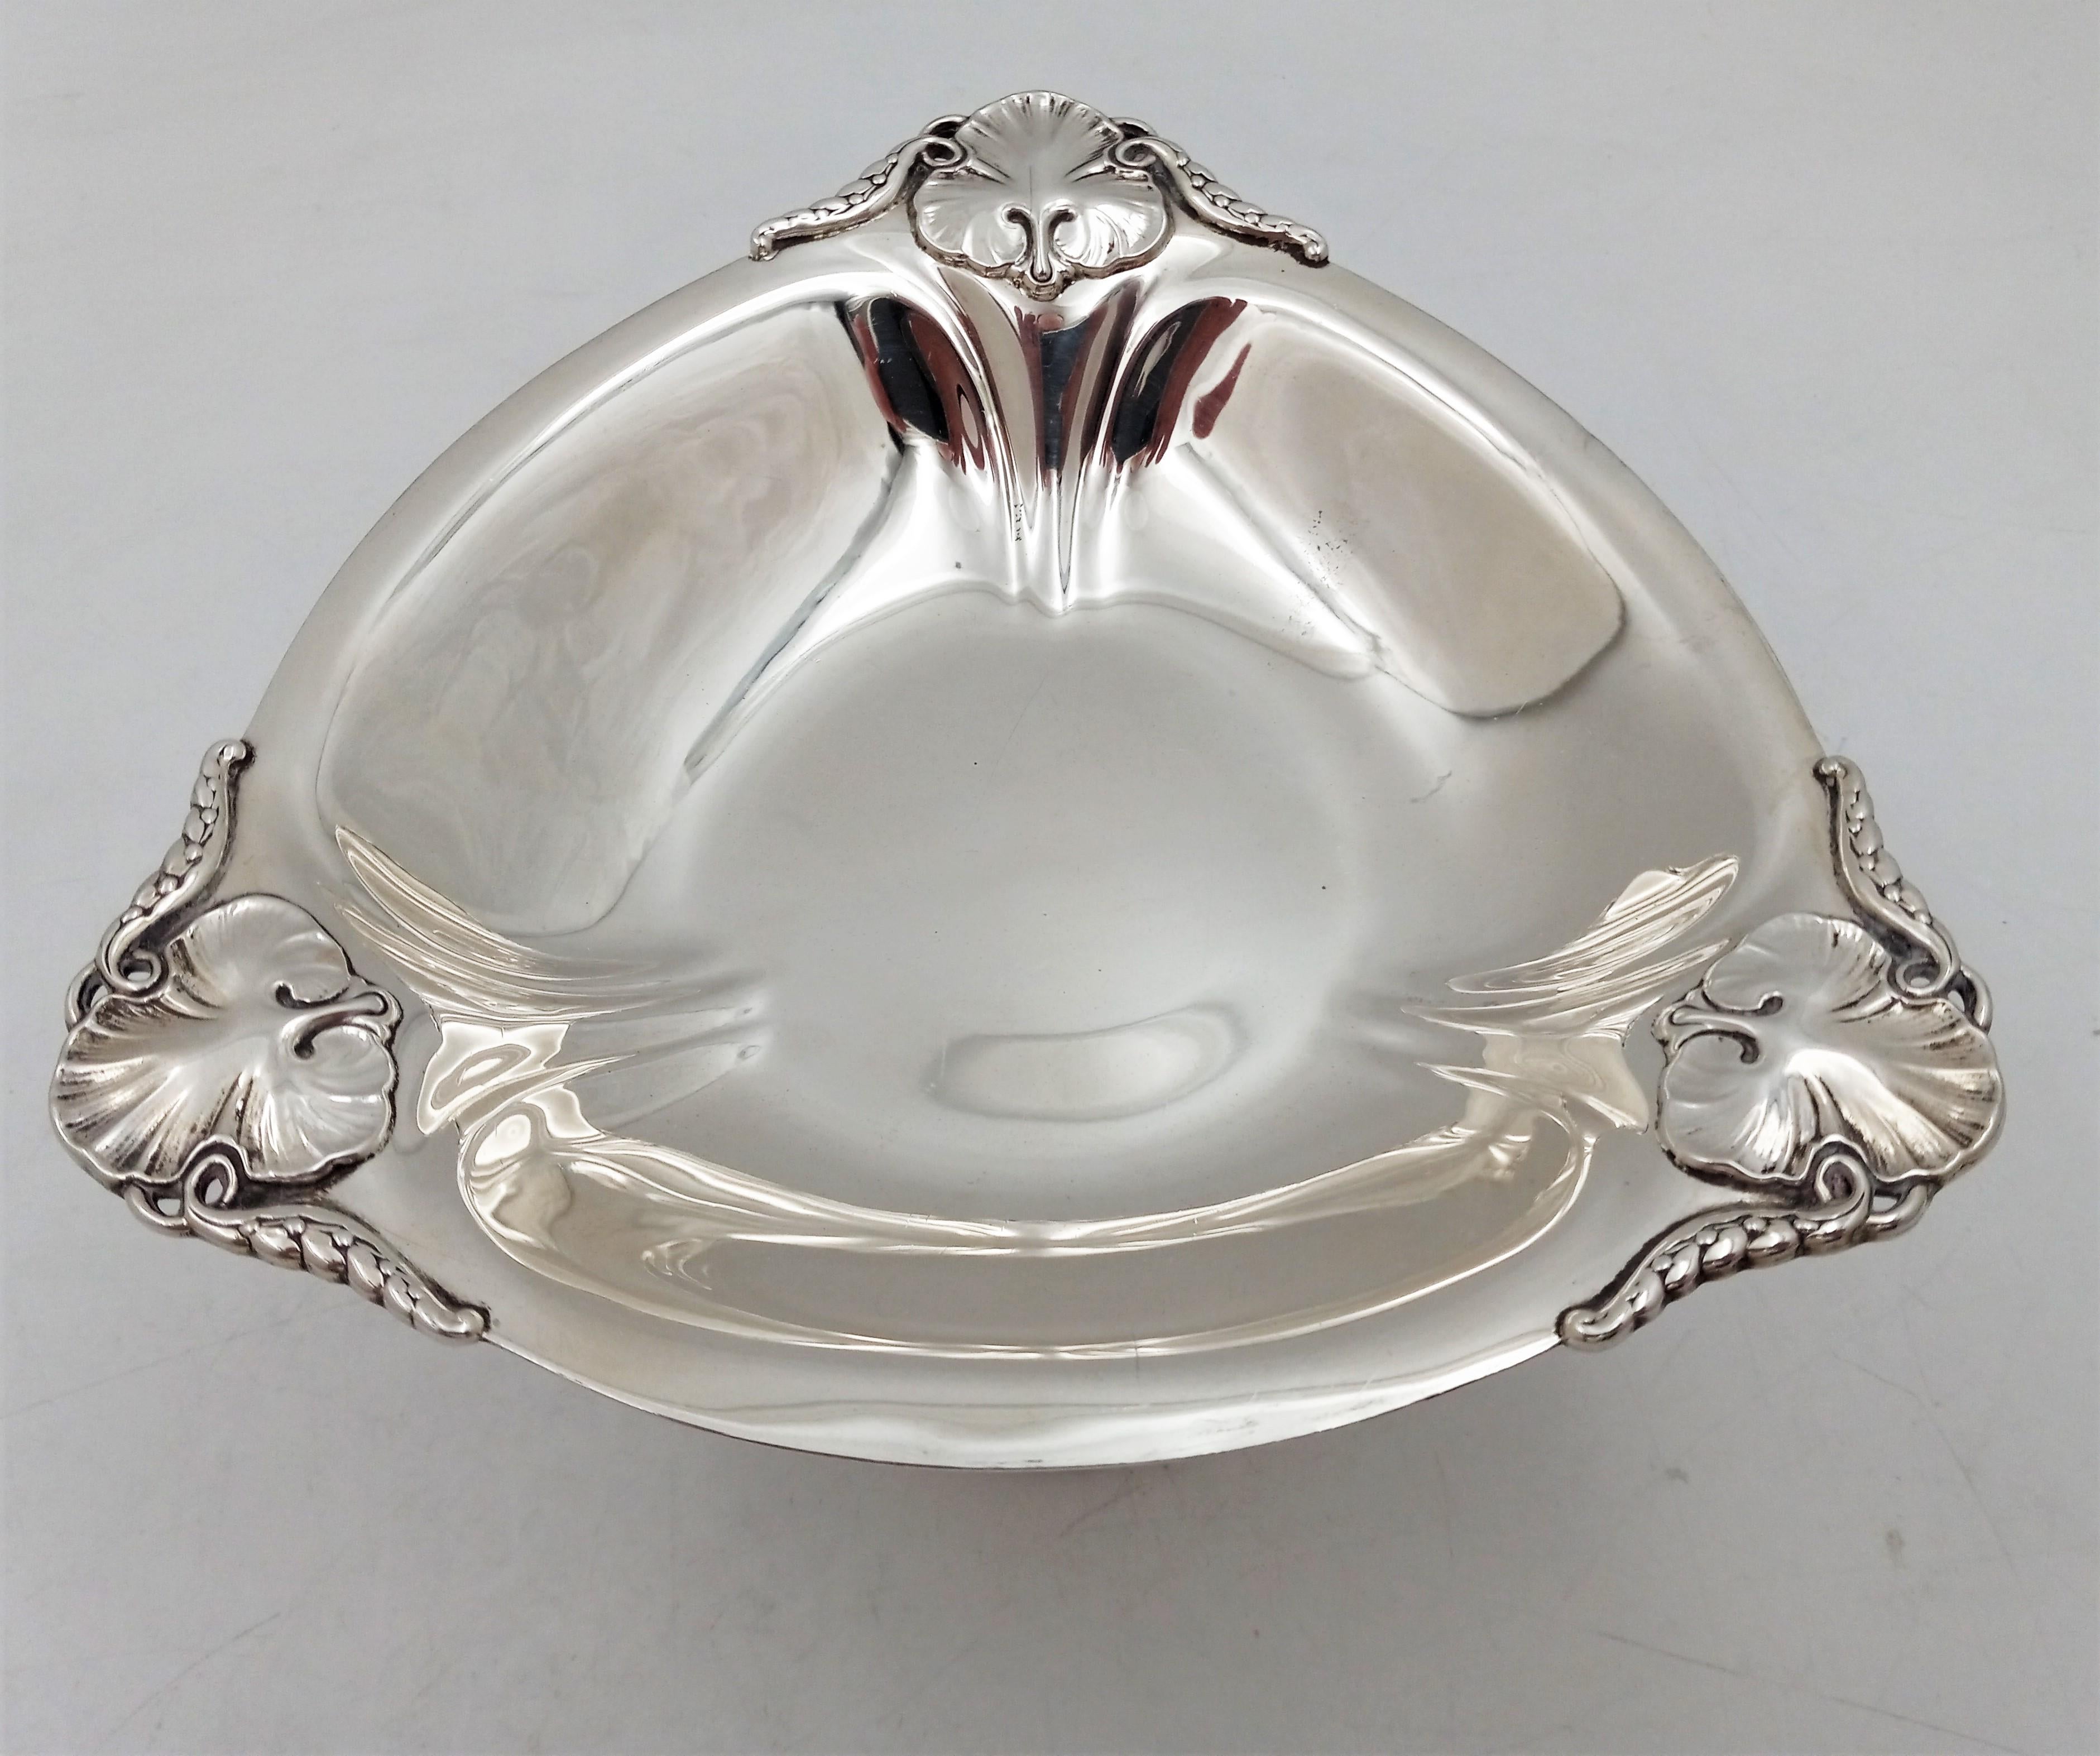 Sterling silver centerpiece bowl by International Sterling in Mid-Century Modern Georg Jensen style with exquisite floral and geometric-shaped designs. It measures 11 1/2'' in diameter by 4 1/2'' in height and weighs 30.1 troy ounces.

The